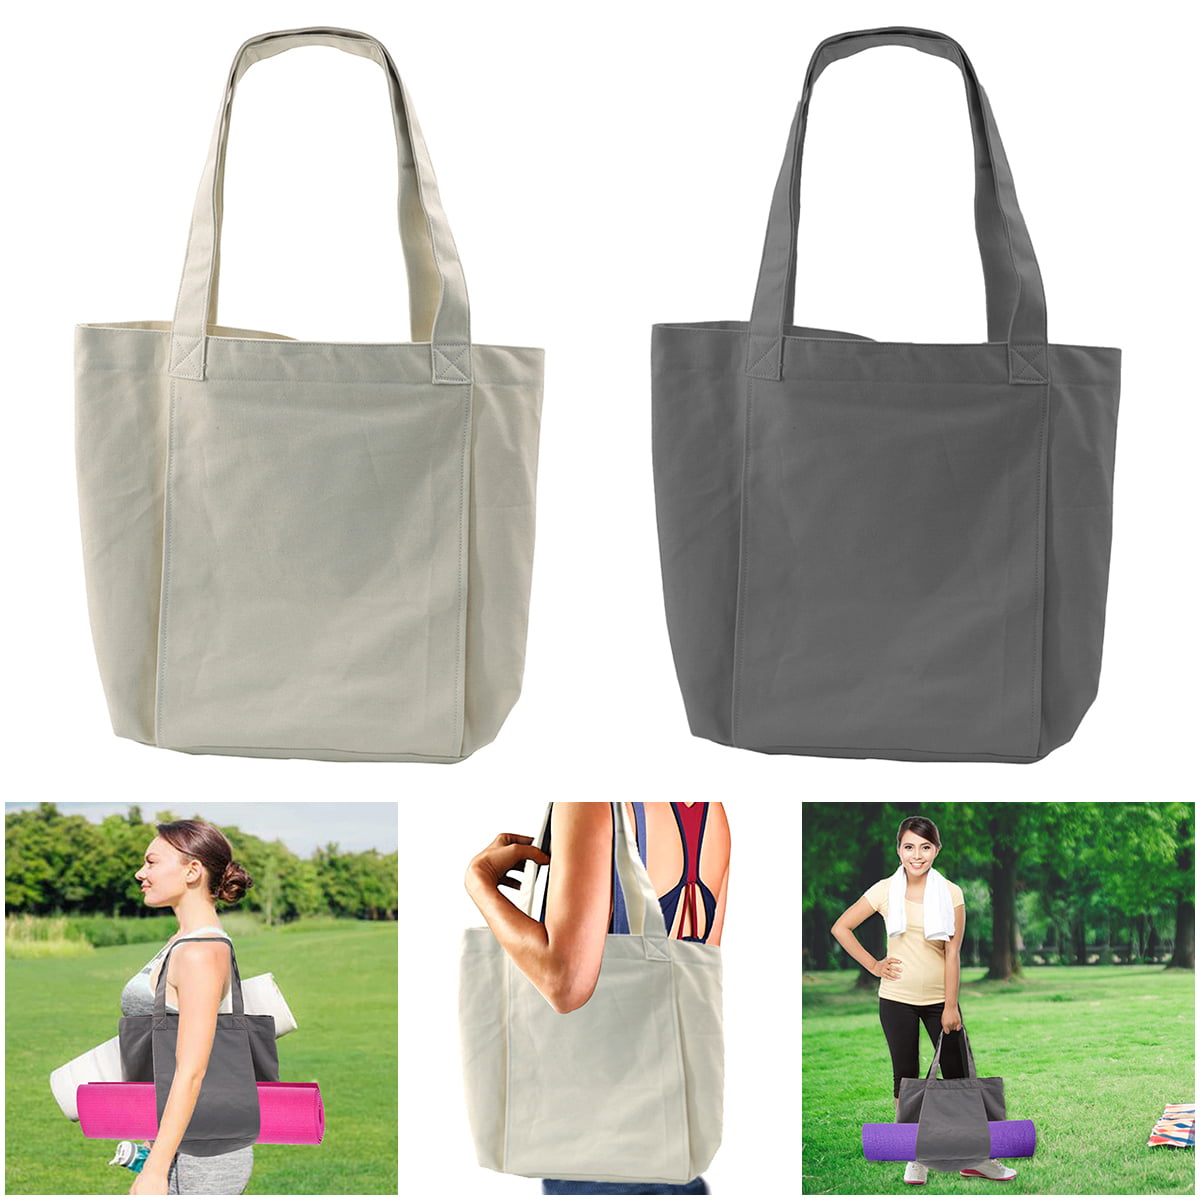 JTWEEN Canvas Tote Bag with Yoga Mat Carrier Pocket Kosovo